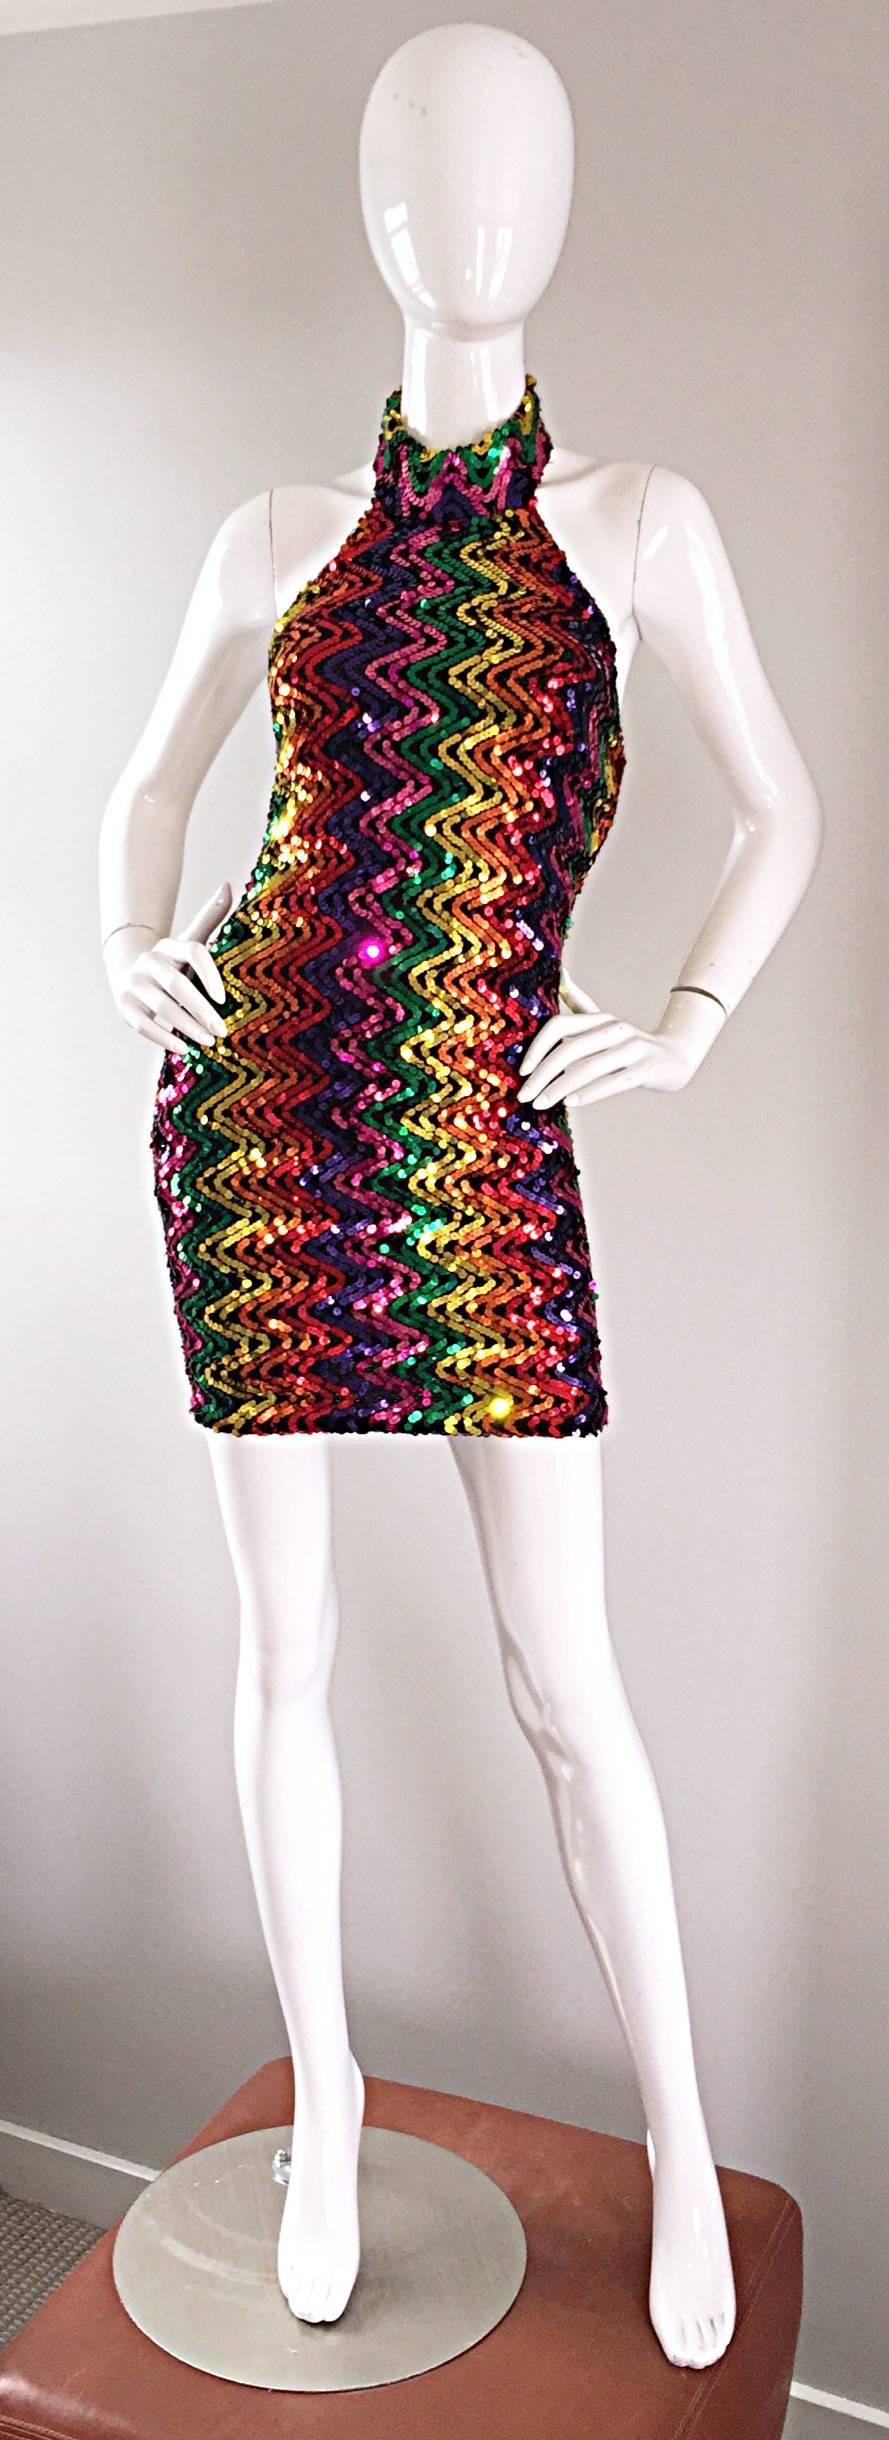 Simply amazing 1990s vintage fully sequined RAINBOW mini halter dress! A definite statement worthy dress that looks amazing on! Comfortable black stretch knit hugs the body in all the right place and stretches to fit. Two buttons closures at the top